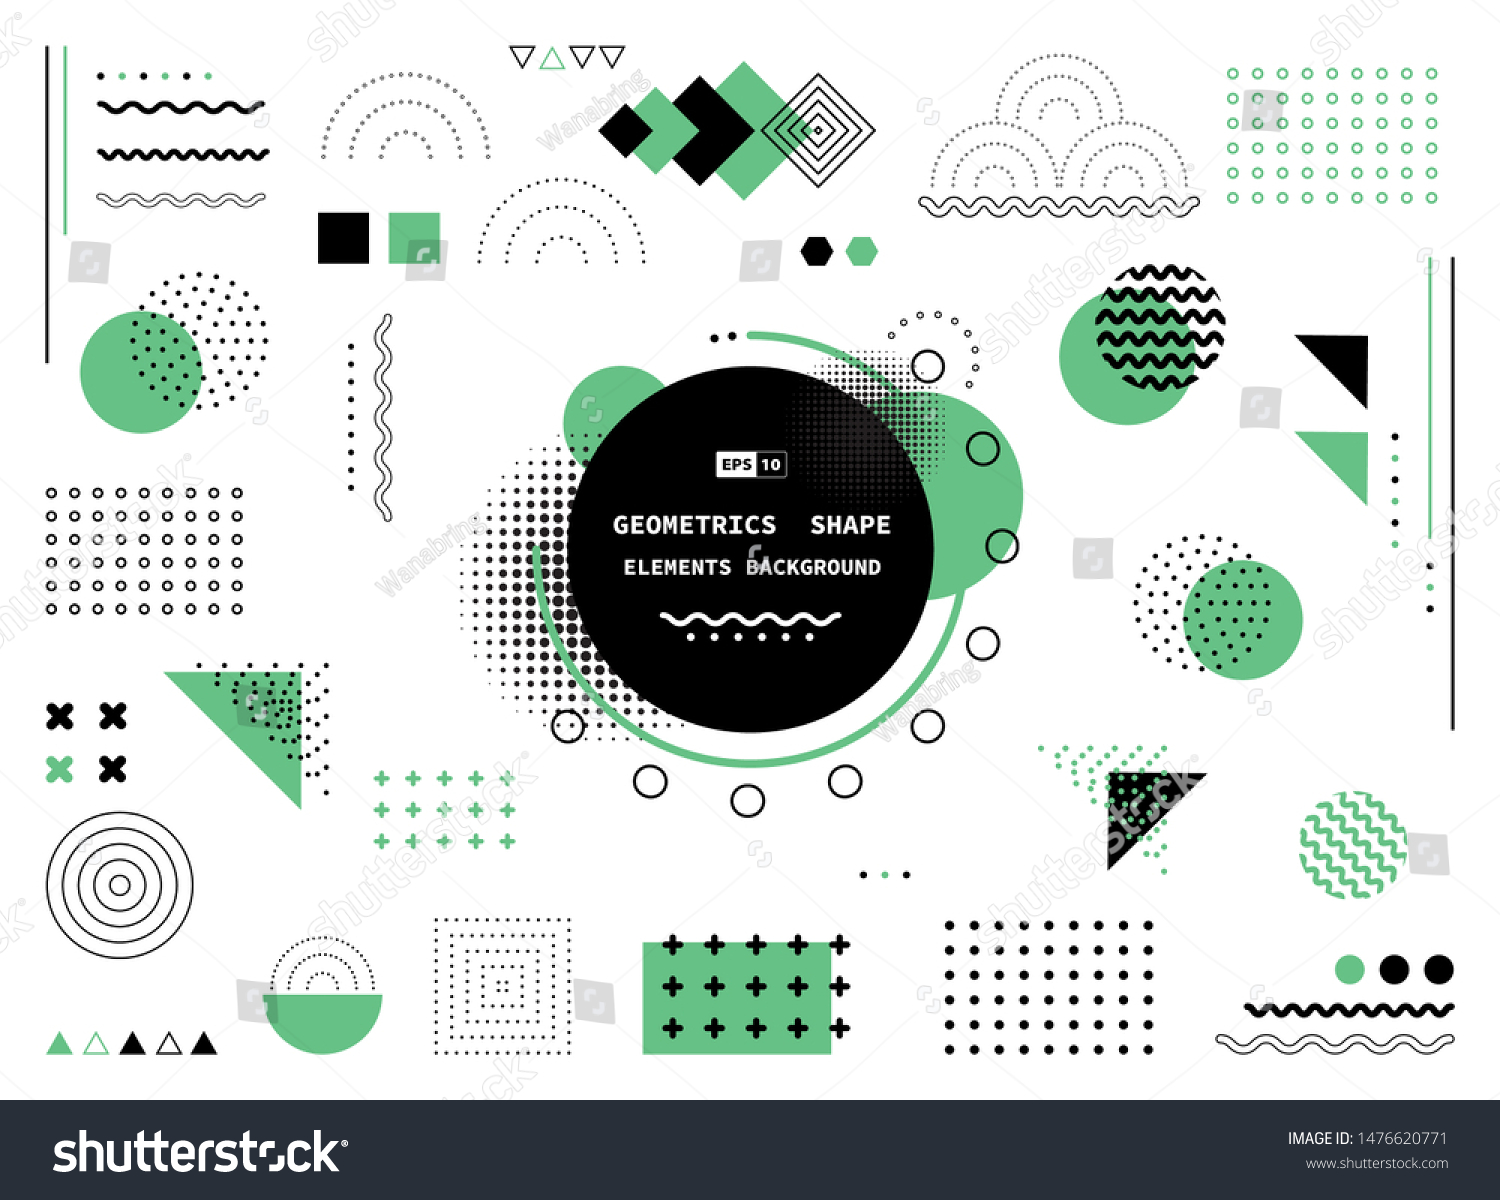 Abstract green and black geometric shape of modern elements cover design. Use for poster, artwork, template design, ad, print. illustration vector eps10 #1476620771